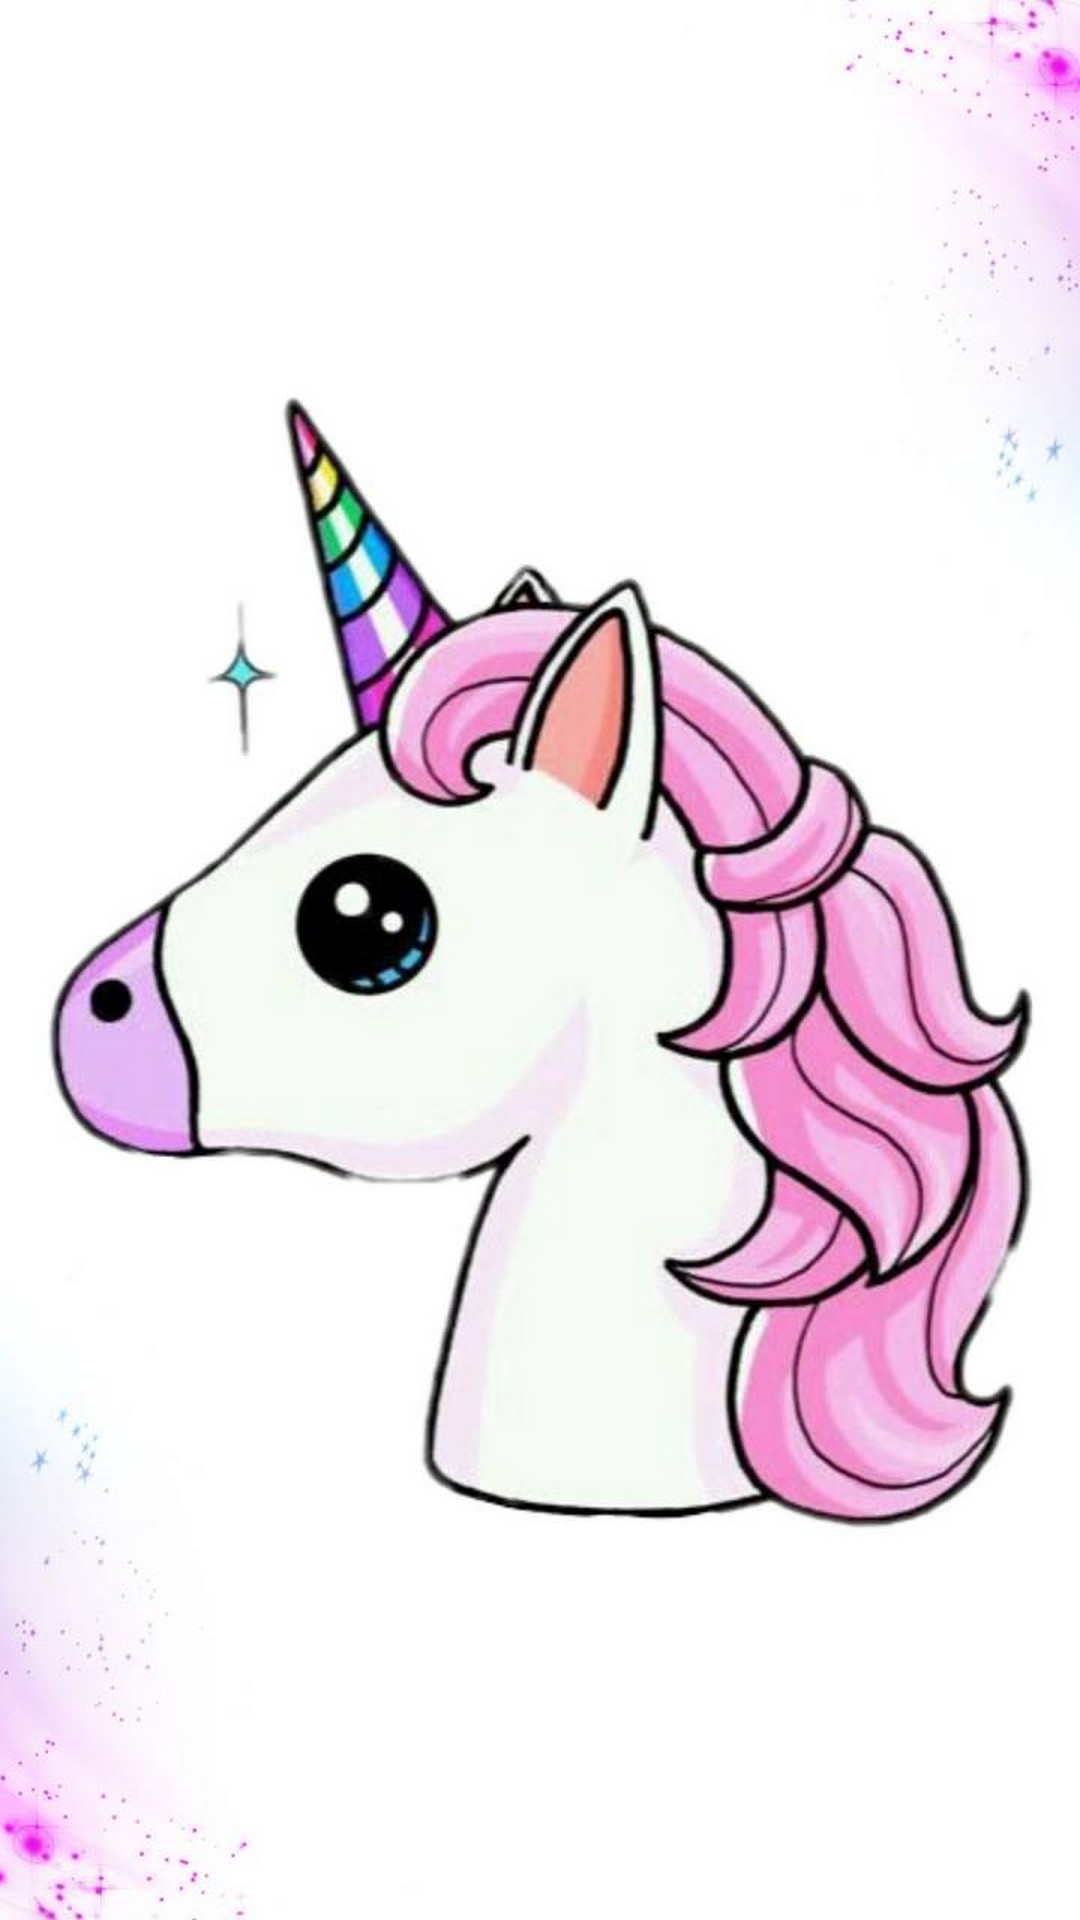 Wallpaper Android Cute Girly Unicorn 2020 Android Wallpapers